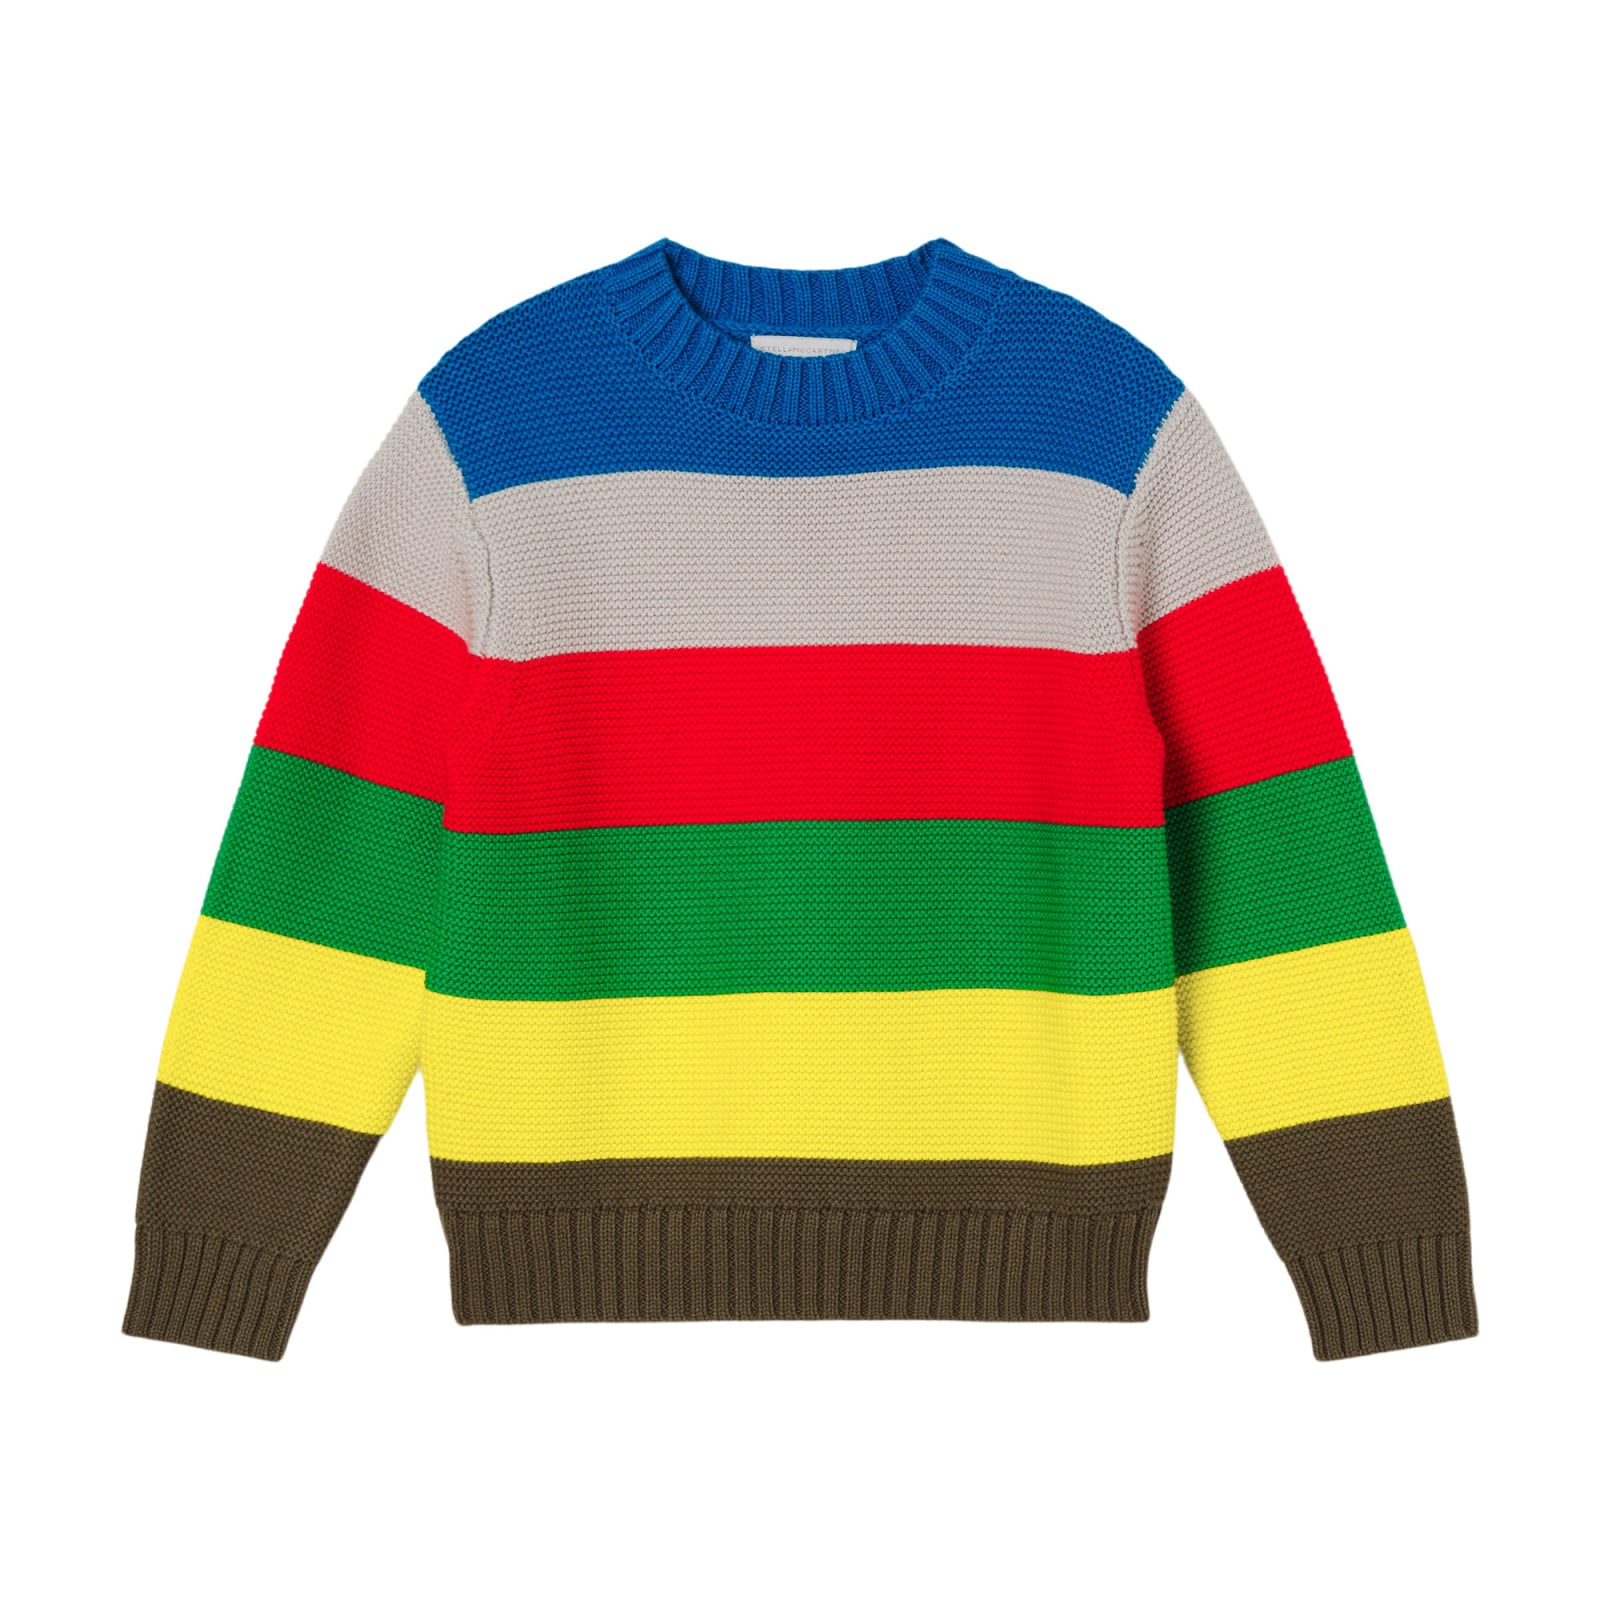 STELLA MCCARTNEY KIDS WOOL AND COTTON SWEATER WITH MULTICOLORED STRIPES PATTERN